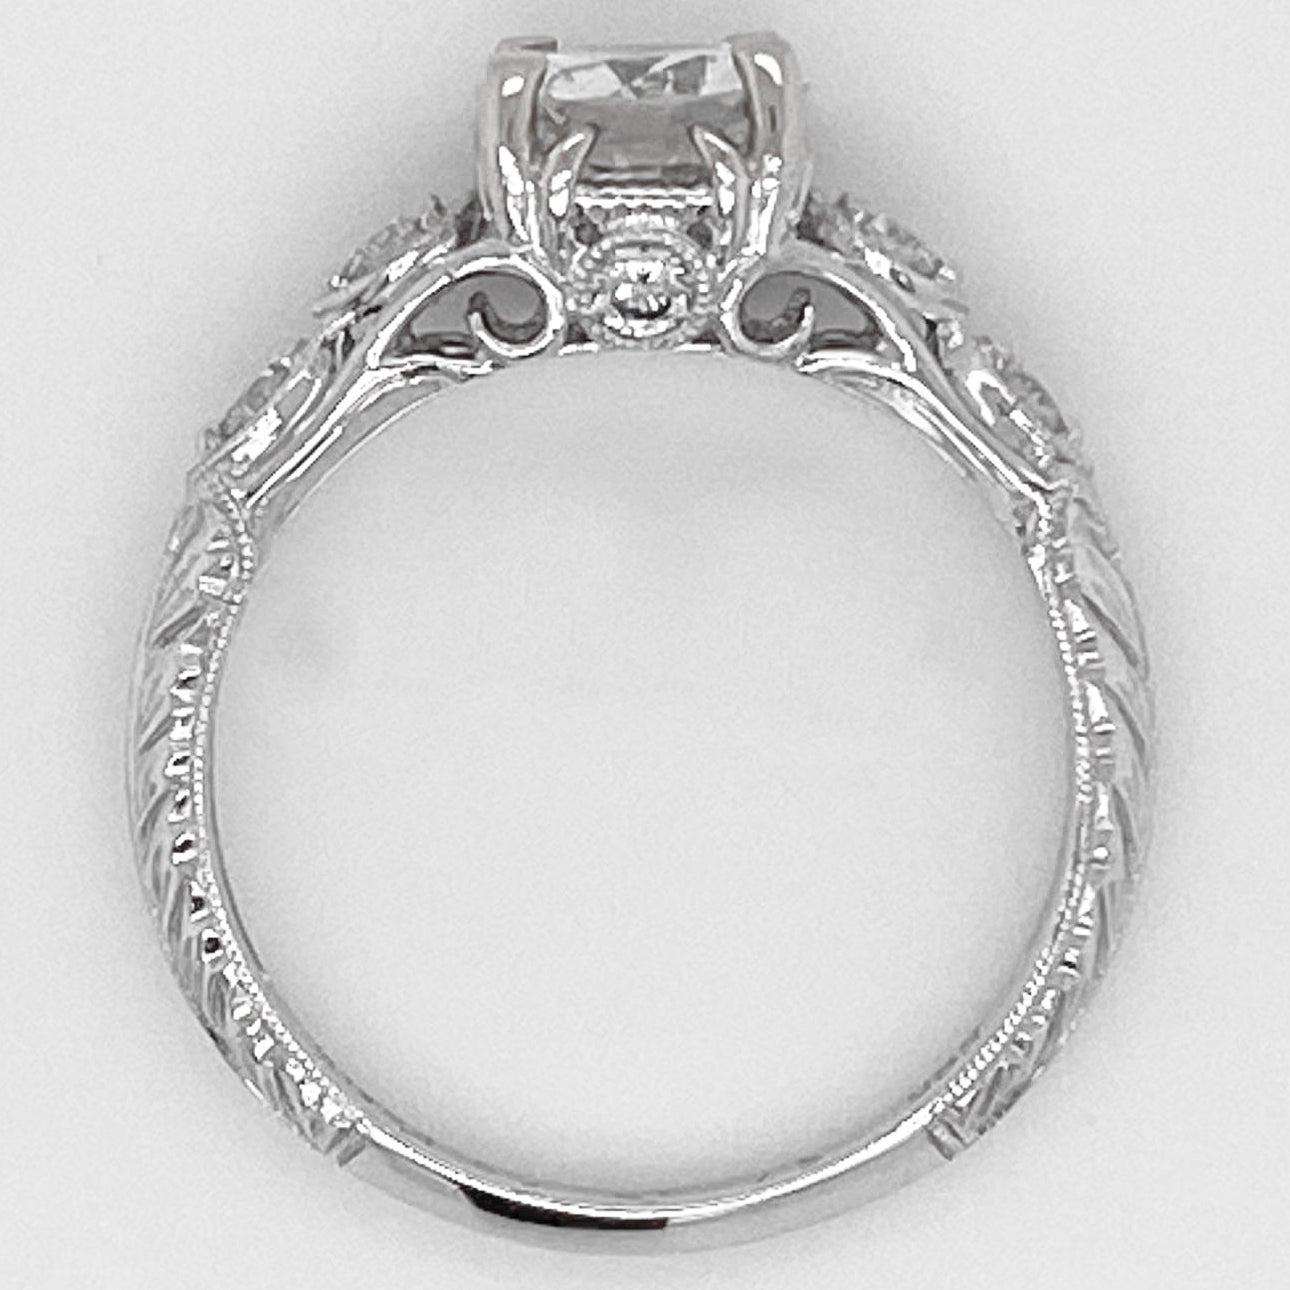 For Sale:  1 Carat Diamond Engagement Ring, White Gold, Round, Vintage, Detailed 4